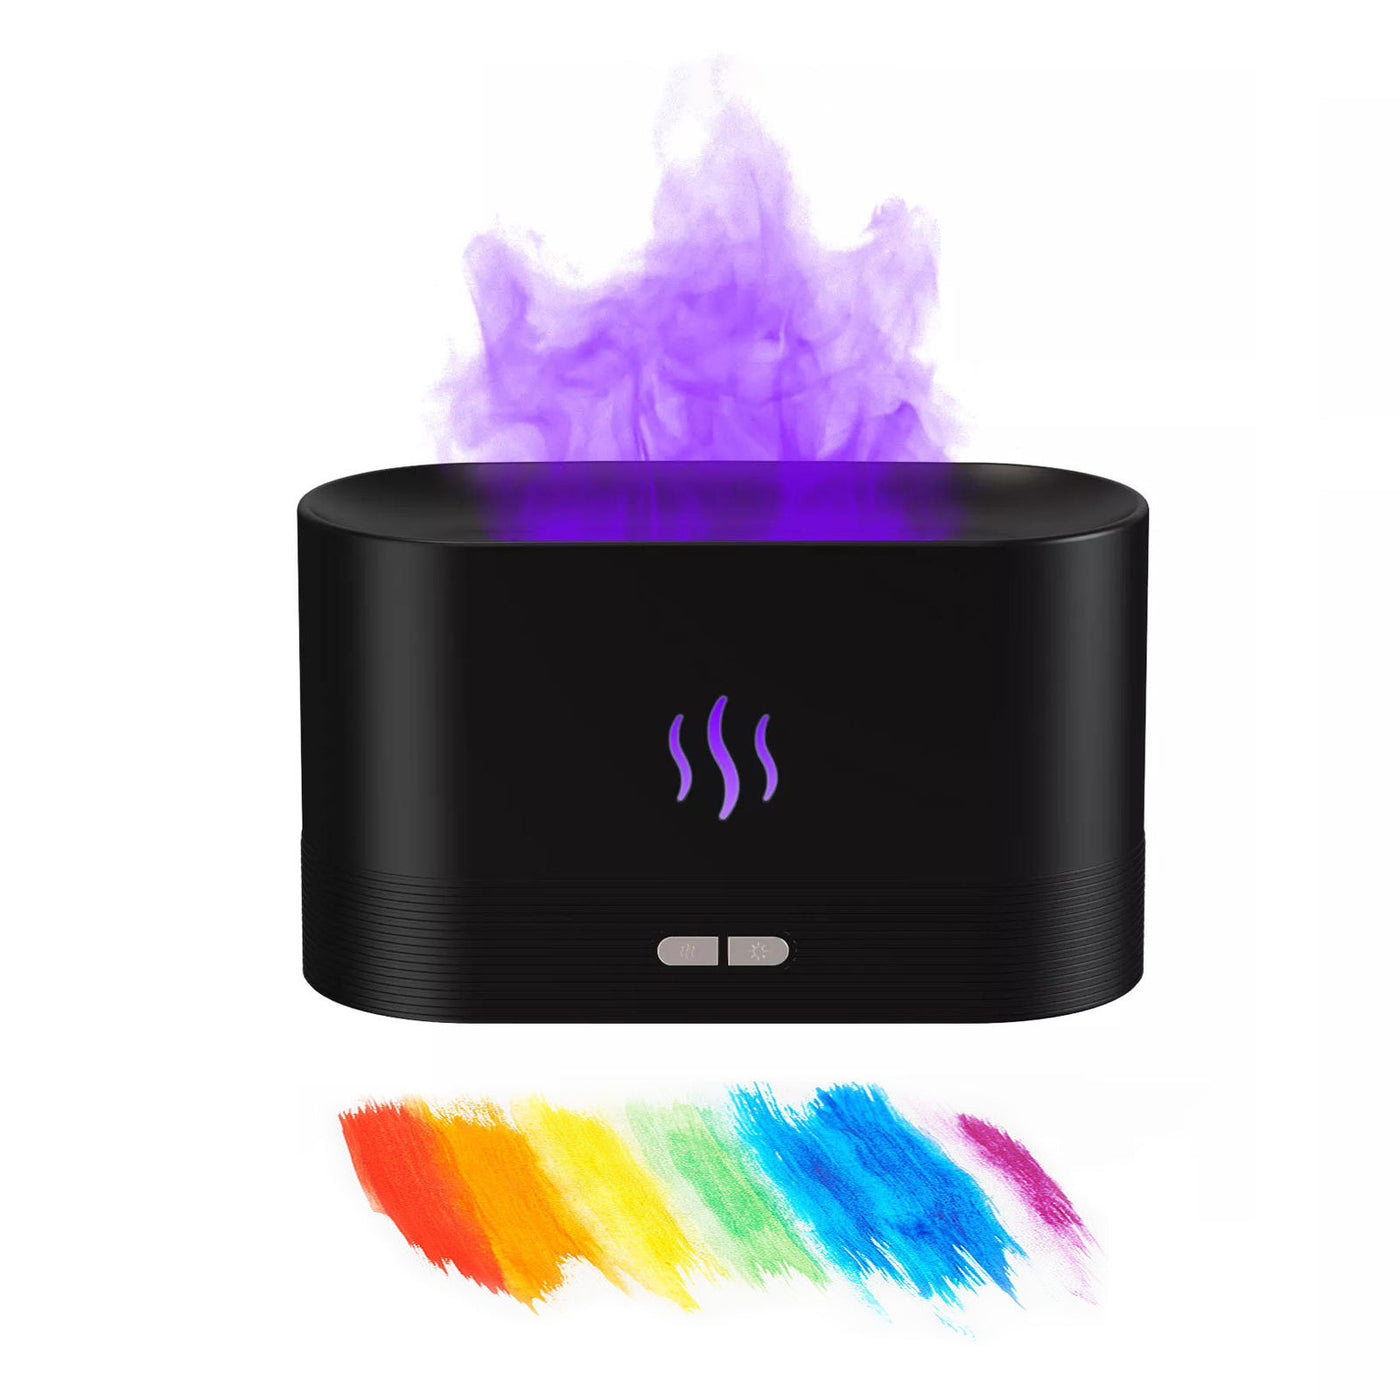 2022 Best Selling USB Ultrasonic Flame Humidifier Led RGB Colorful Essential Oil Fire Flame Aroma Diffuser - My Tech Addict